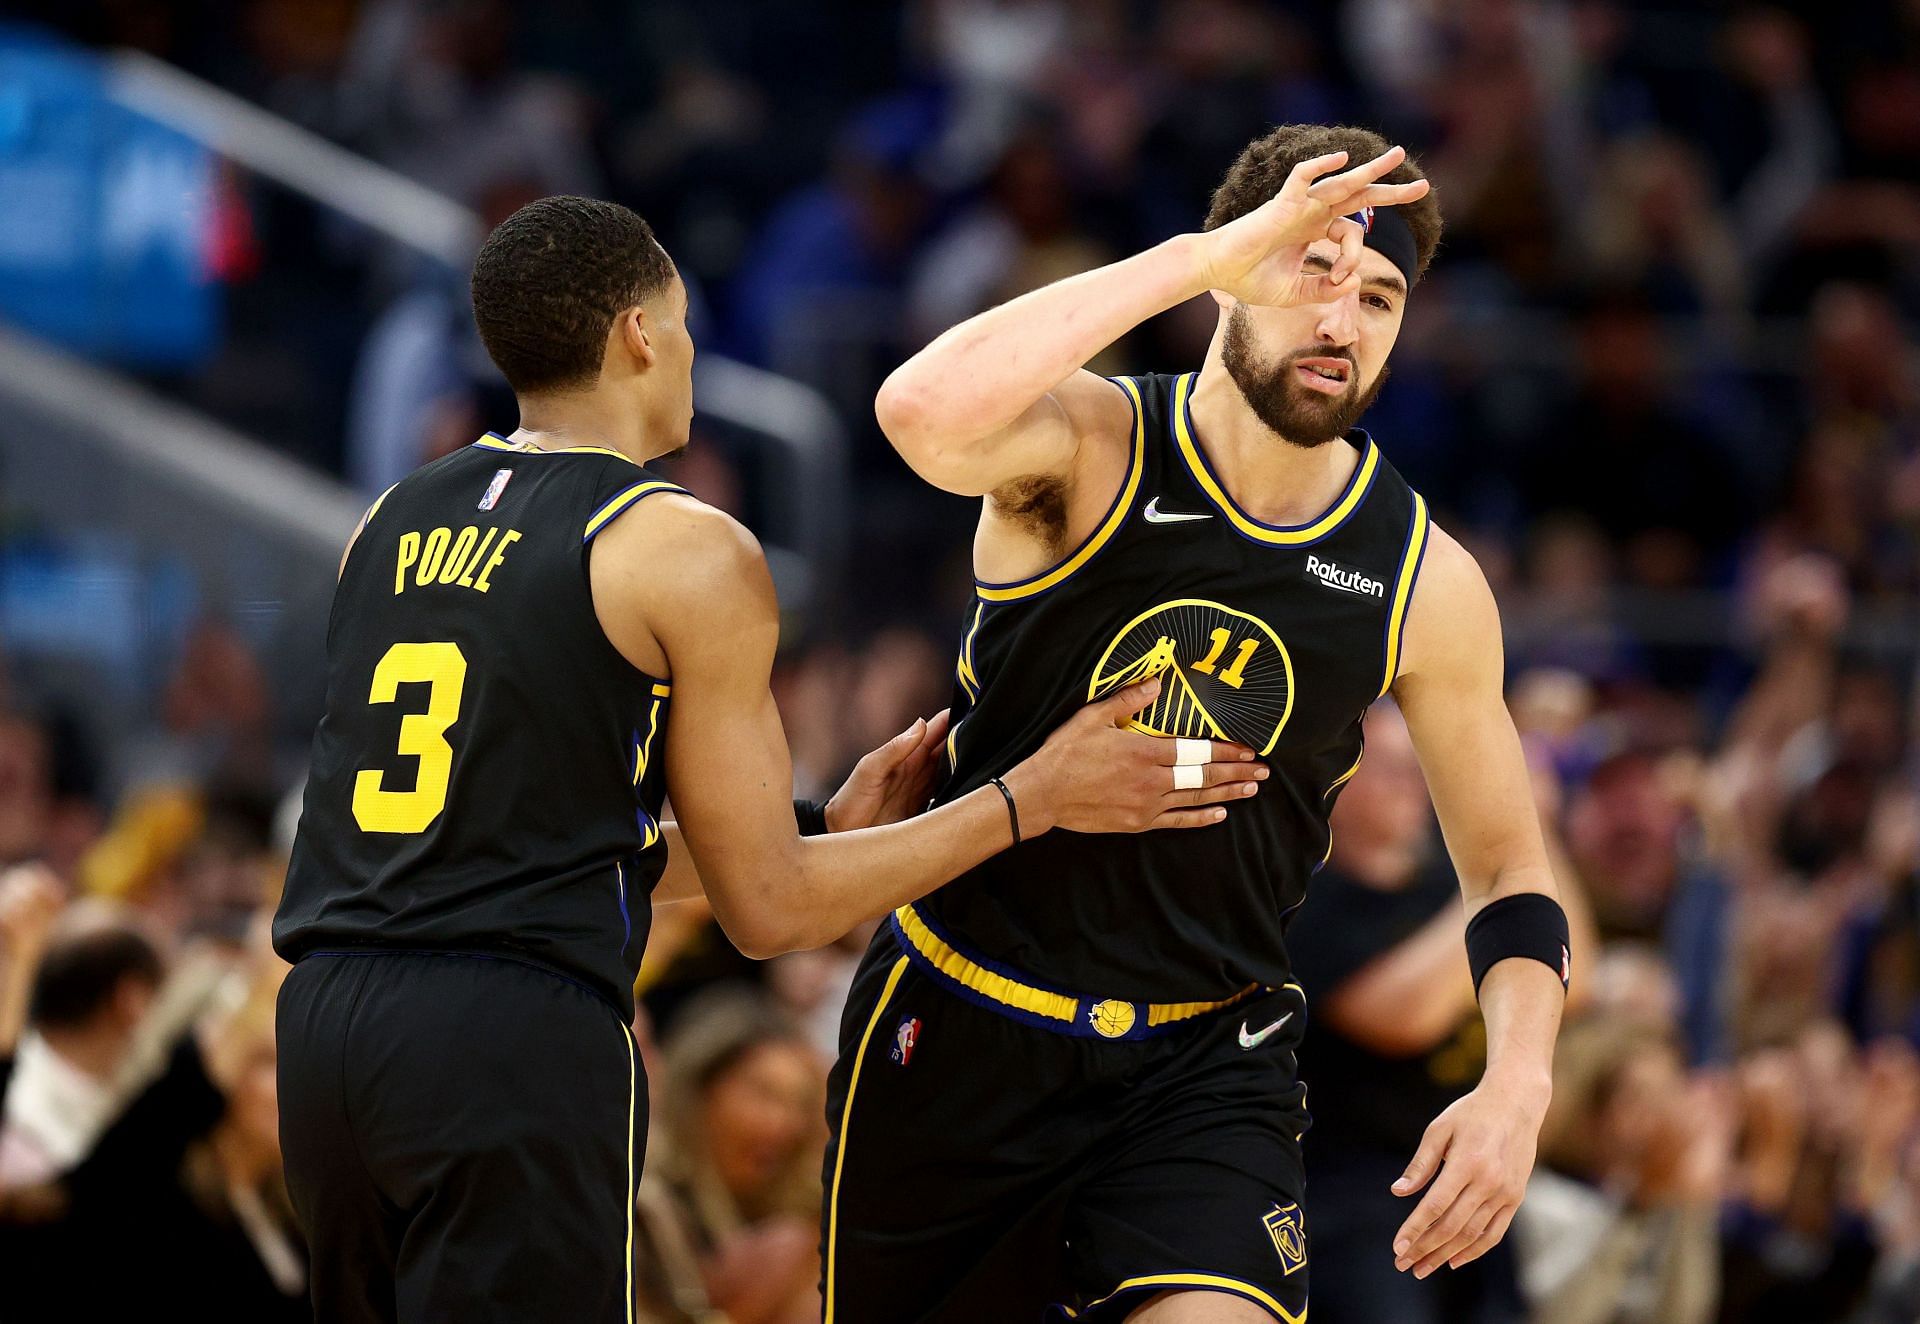 Jordan Poole and Klay Thompson of the Golden State Warriors react after Thompson made a 3-pointer against the Denver Nuggets during Game 1 of the Western Conference first-round series on April 16 in San Francisco, California.